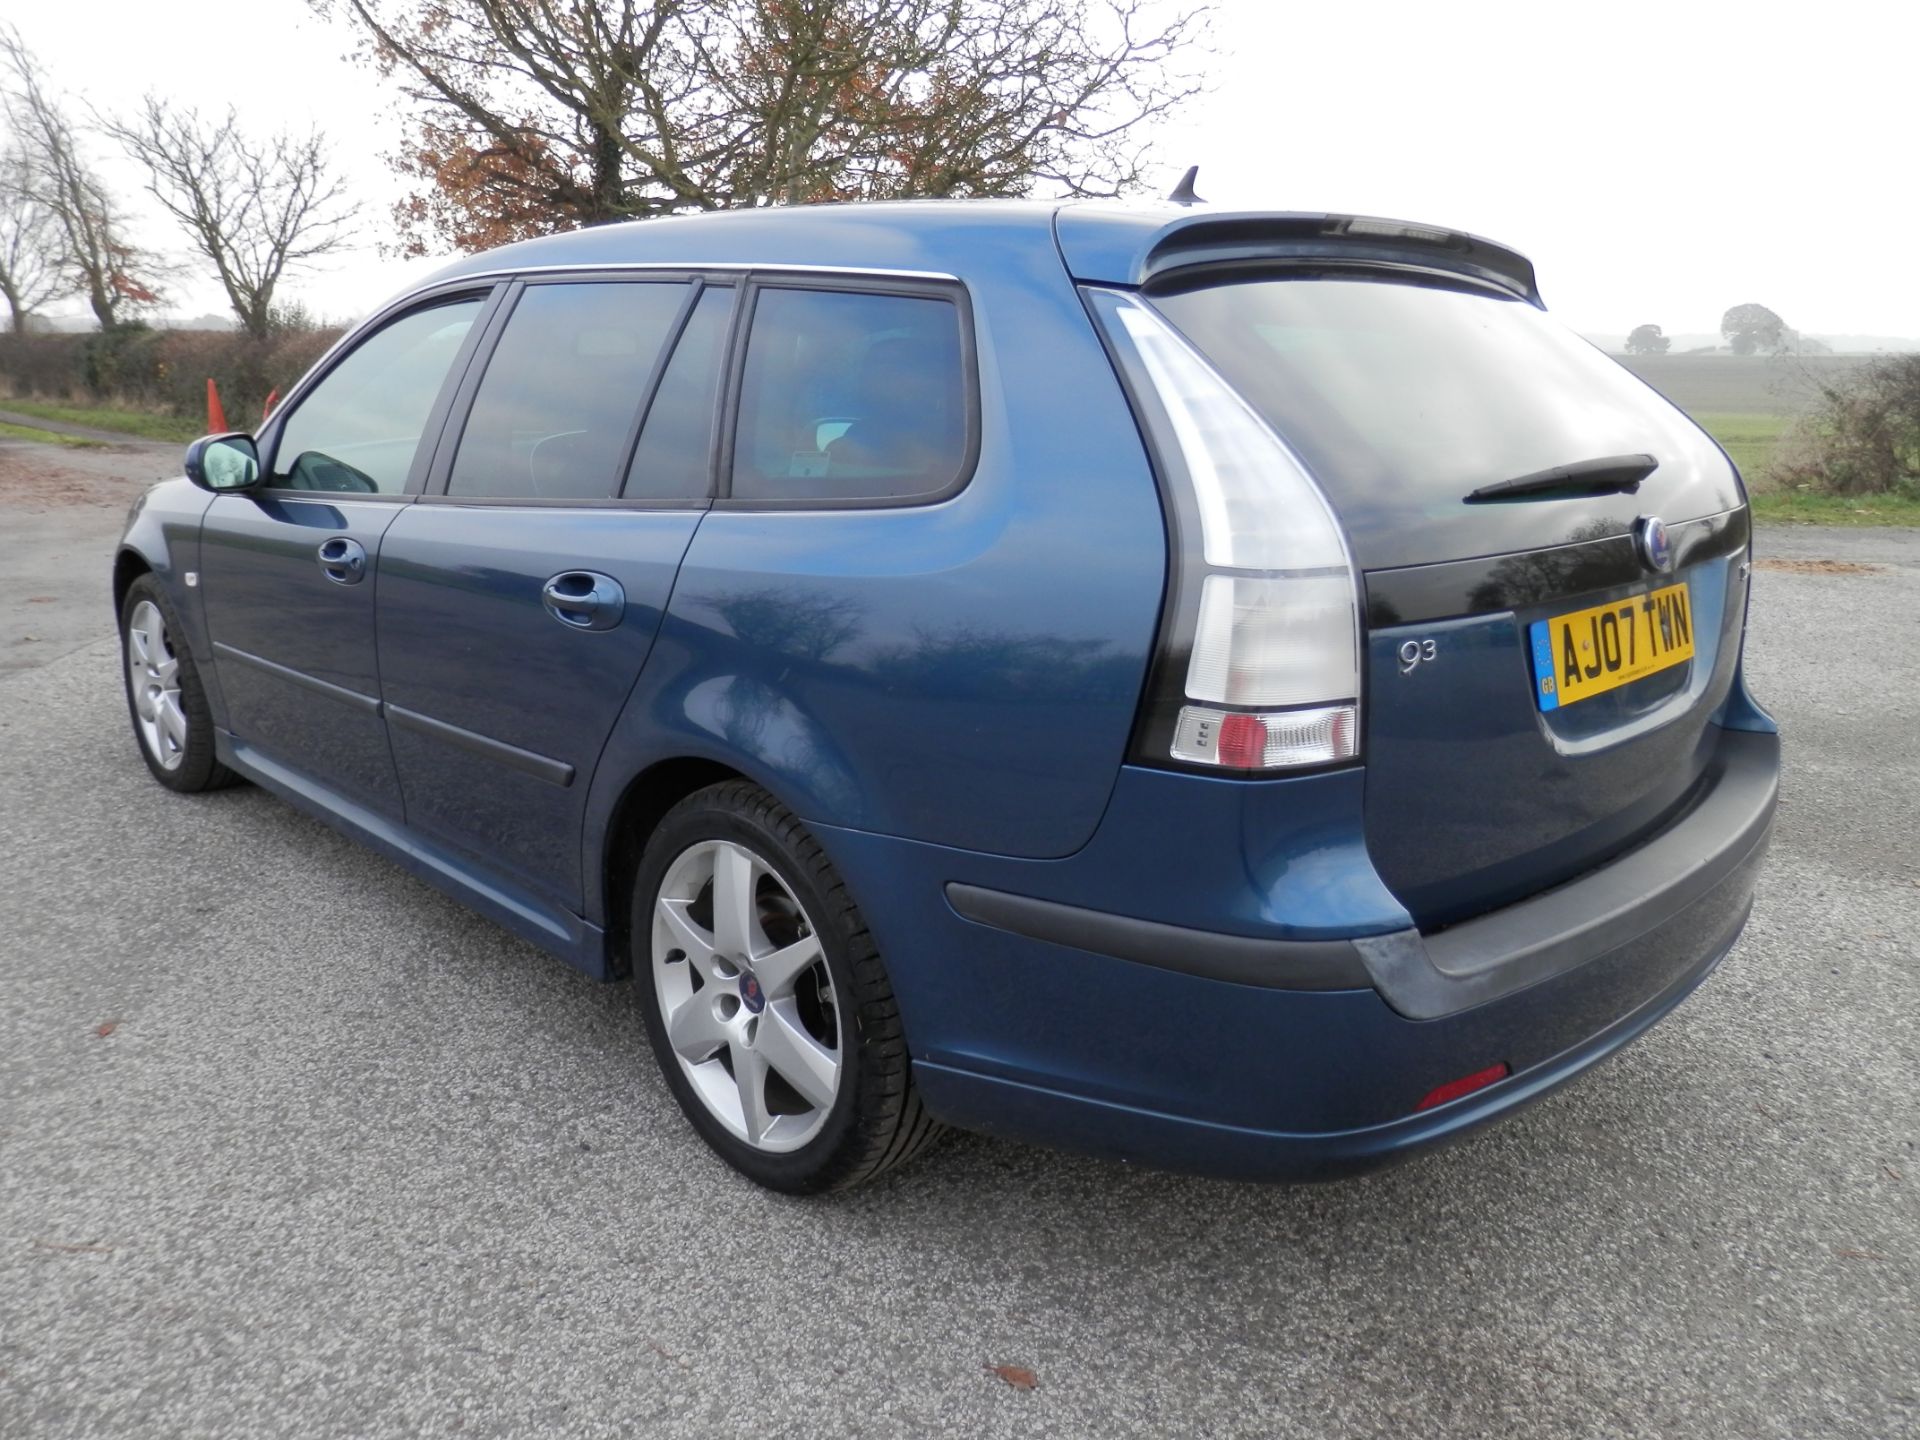 NOW WITH NO RESERVE !! 2007/07 SAAB 93 SPORTWAGON 1.9 TID 120 BHP, 6 SPEED MANUAL, MOT MARCH 2007. - Image 5 of 25